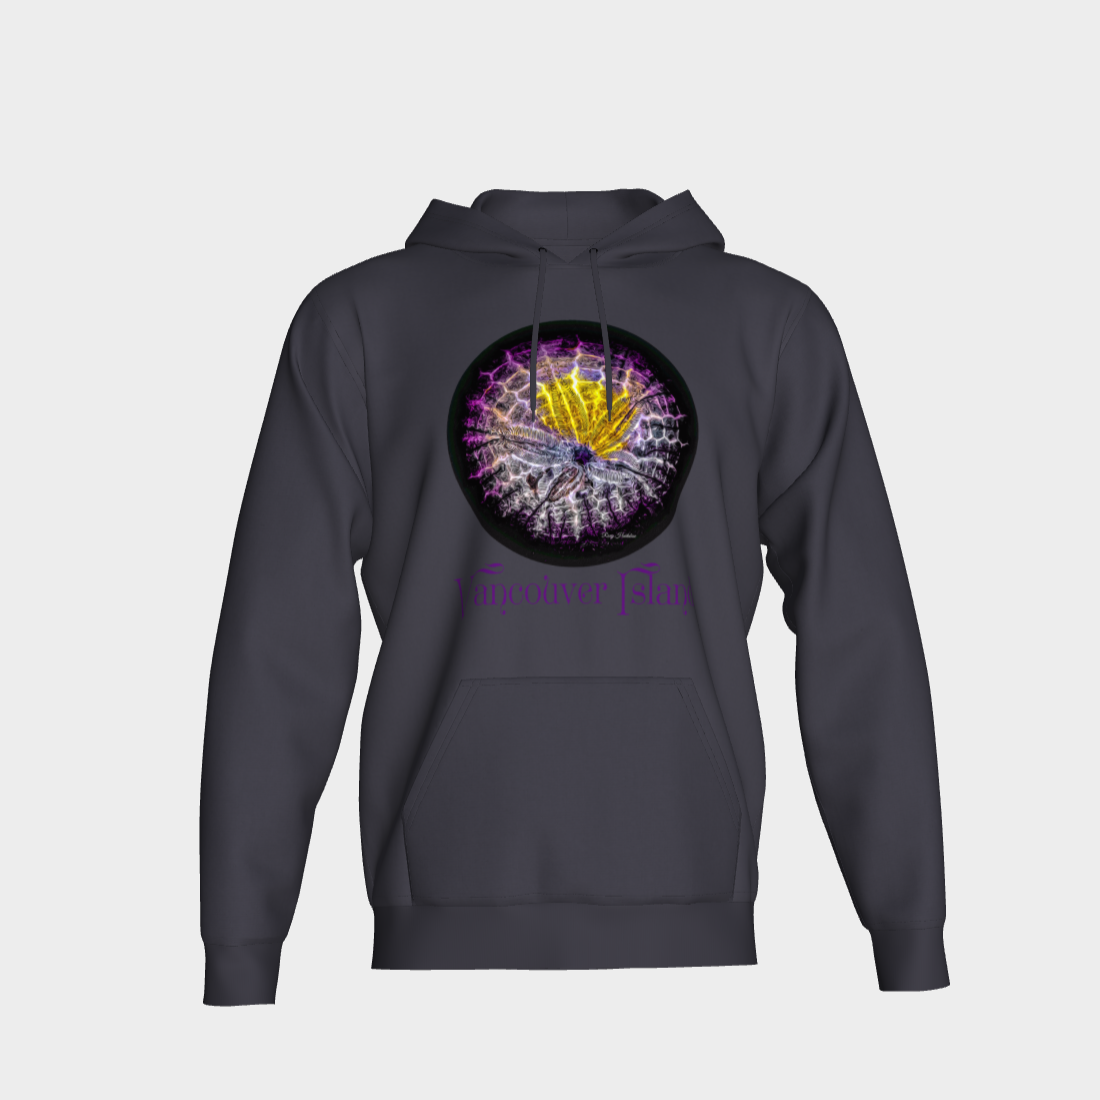 Spotlight Sand Dollar Vancouver Island Unisex Pullover Hoodie Your Van Isle Goddess unisex pullover hoodie is a great classic hoodie!  Created with state of the art tri-tex material which is a non-shrink poly middle encased in two layers of ultra soft cotton face and lining